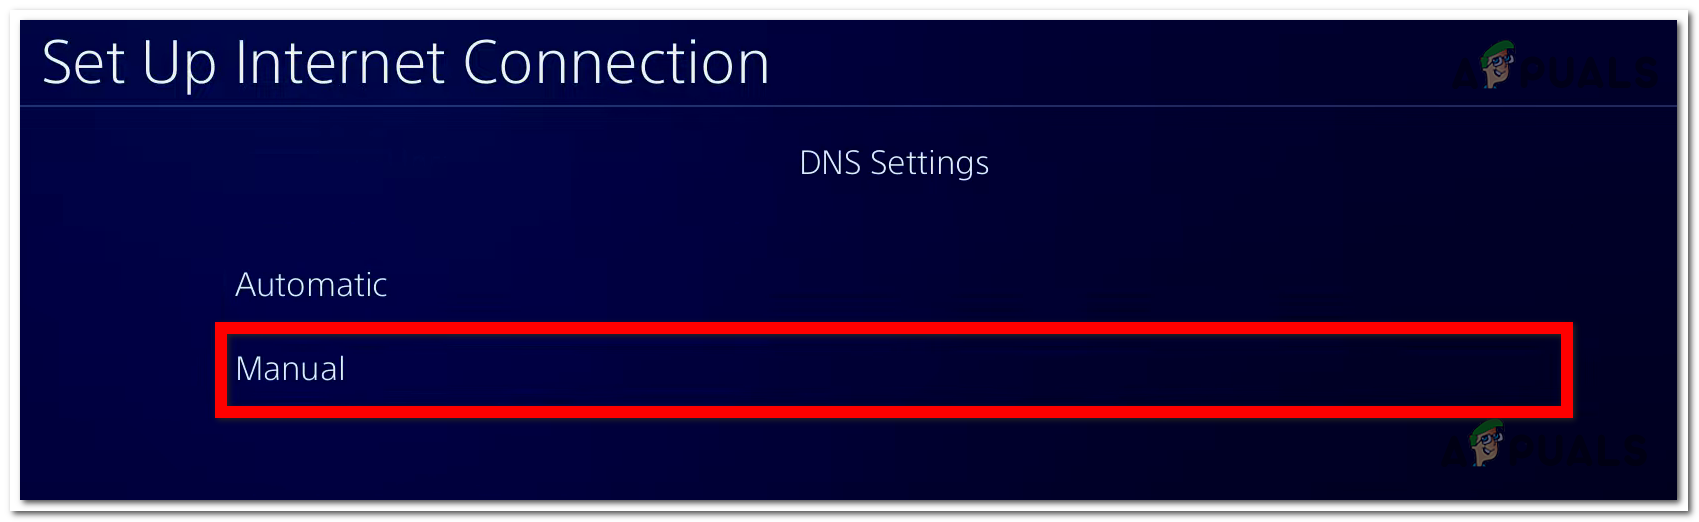 Setting the DNS Settings to Manual